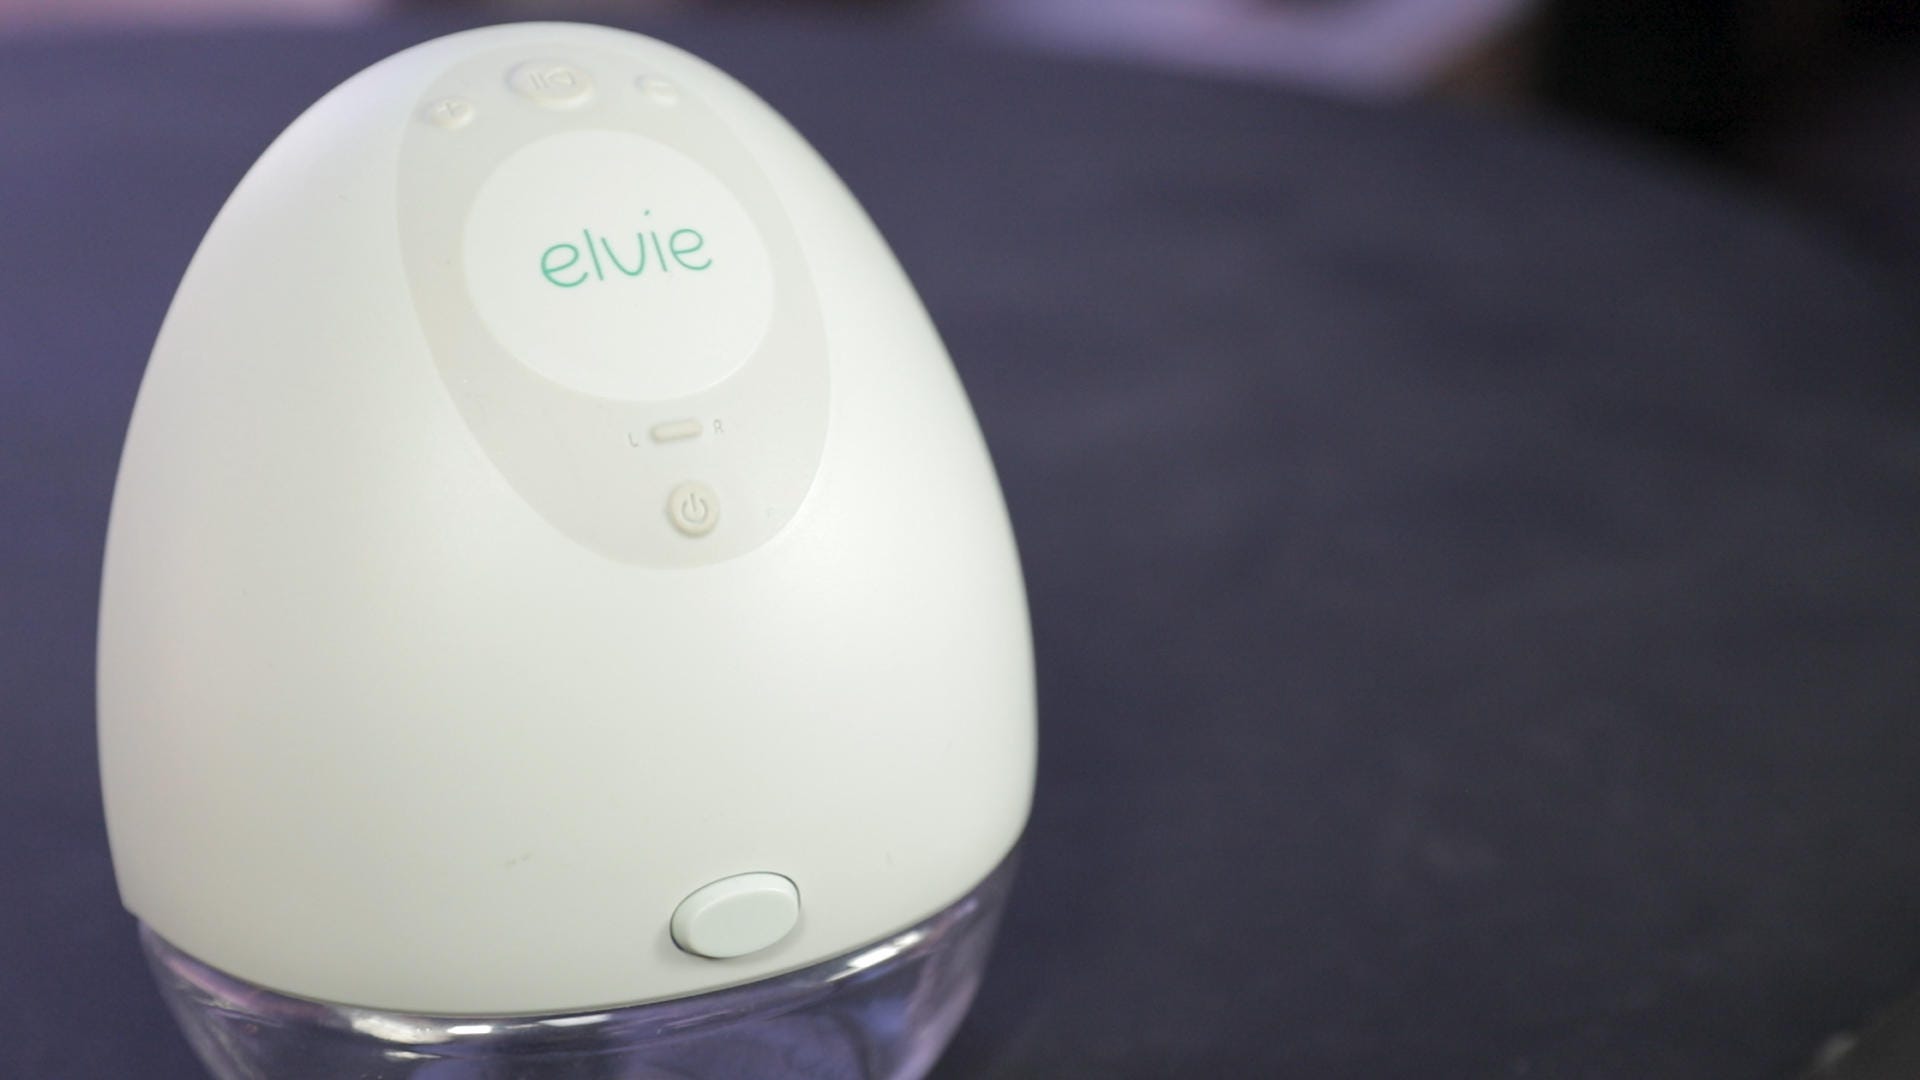 Elvie launches the next breast pump that makes pumping wearable - Video -  CNET